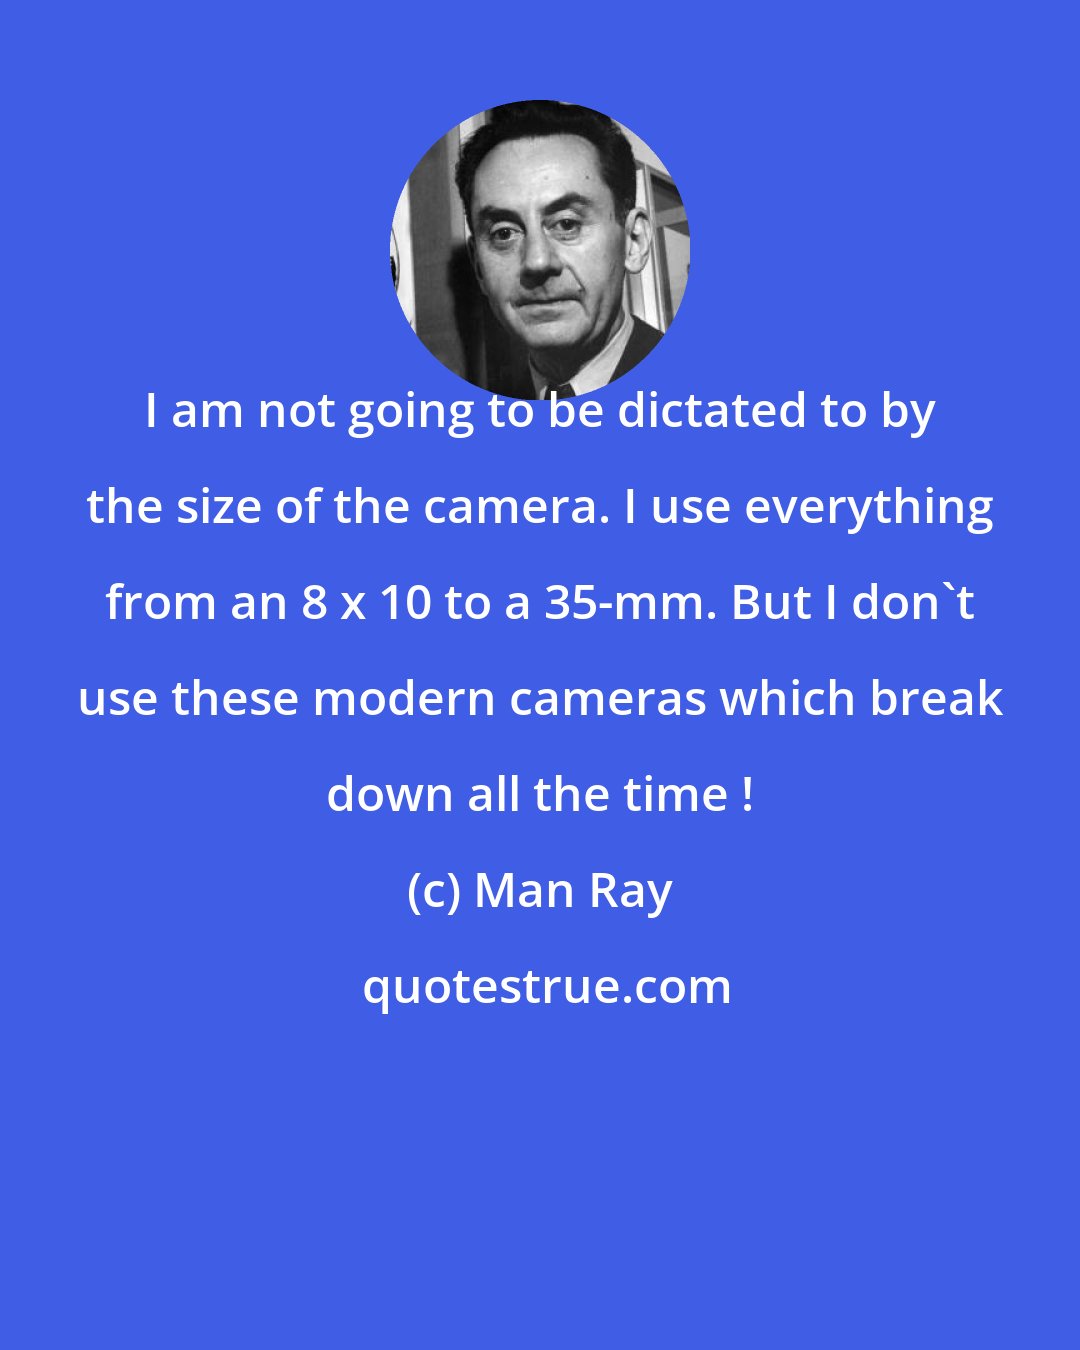 Man Ray: I am not going to be dictated to by the size of the camera. I use everything from an 8 x 10 to a 35-mm. But I don't use these modern cameras which break down all the time !